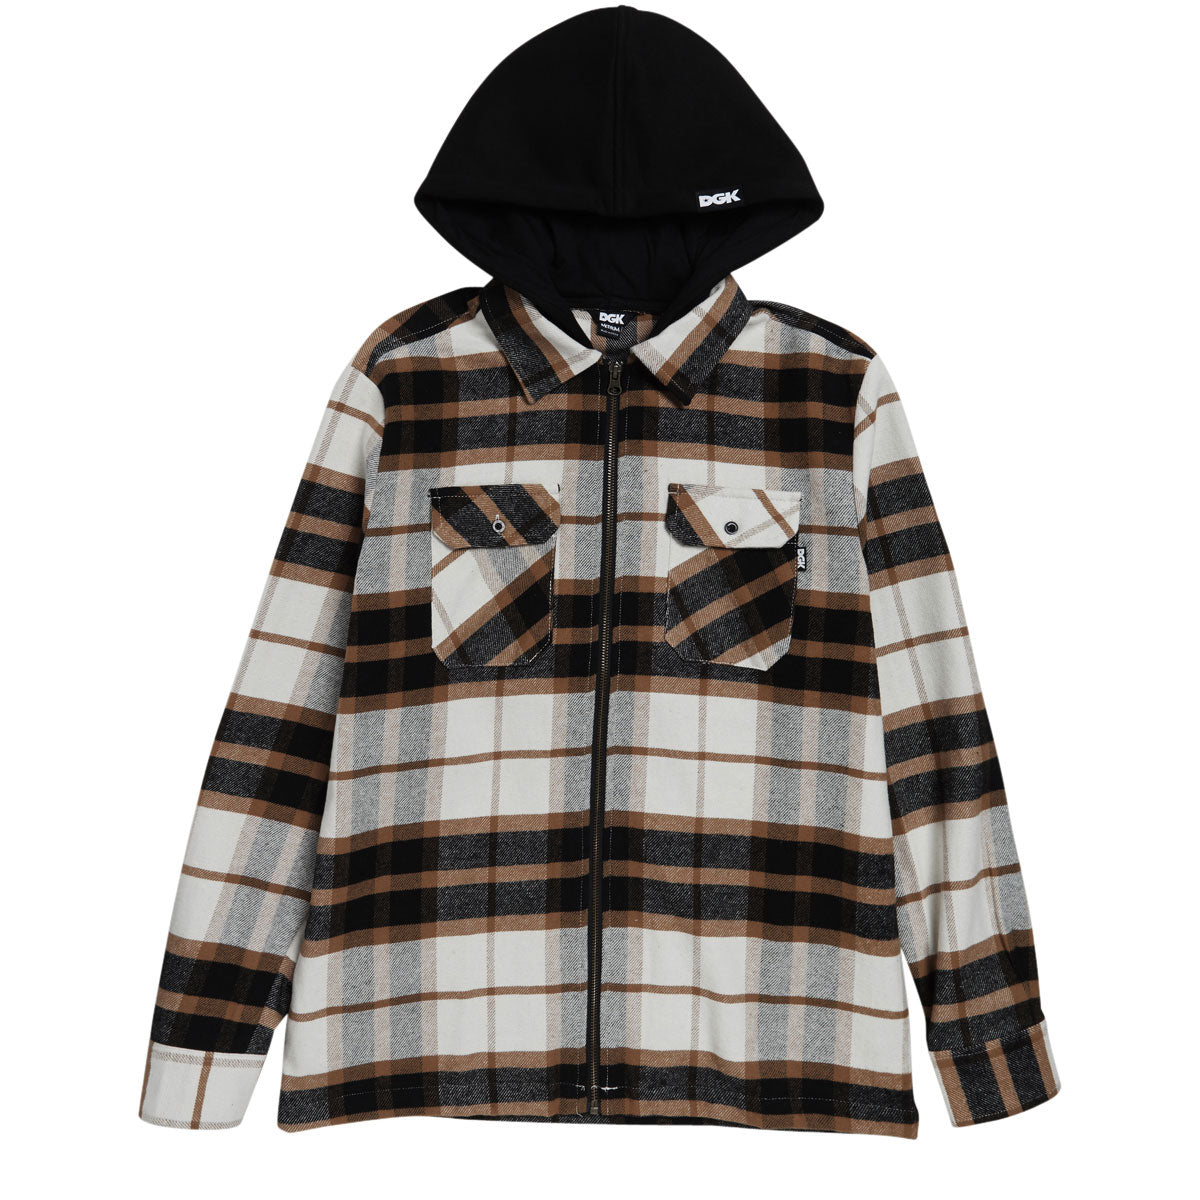 DGK Cry Later Flannel Shacket Jacket - Brown image 1